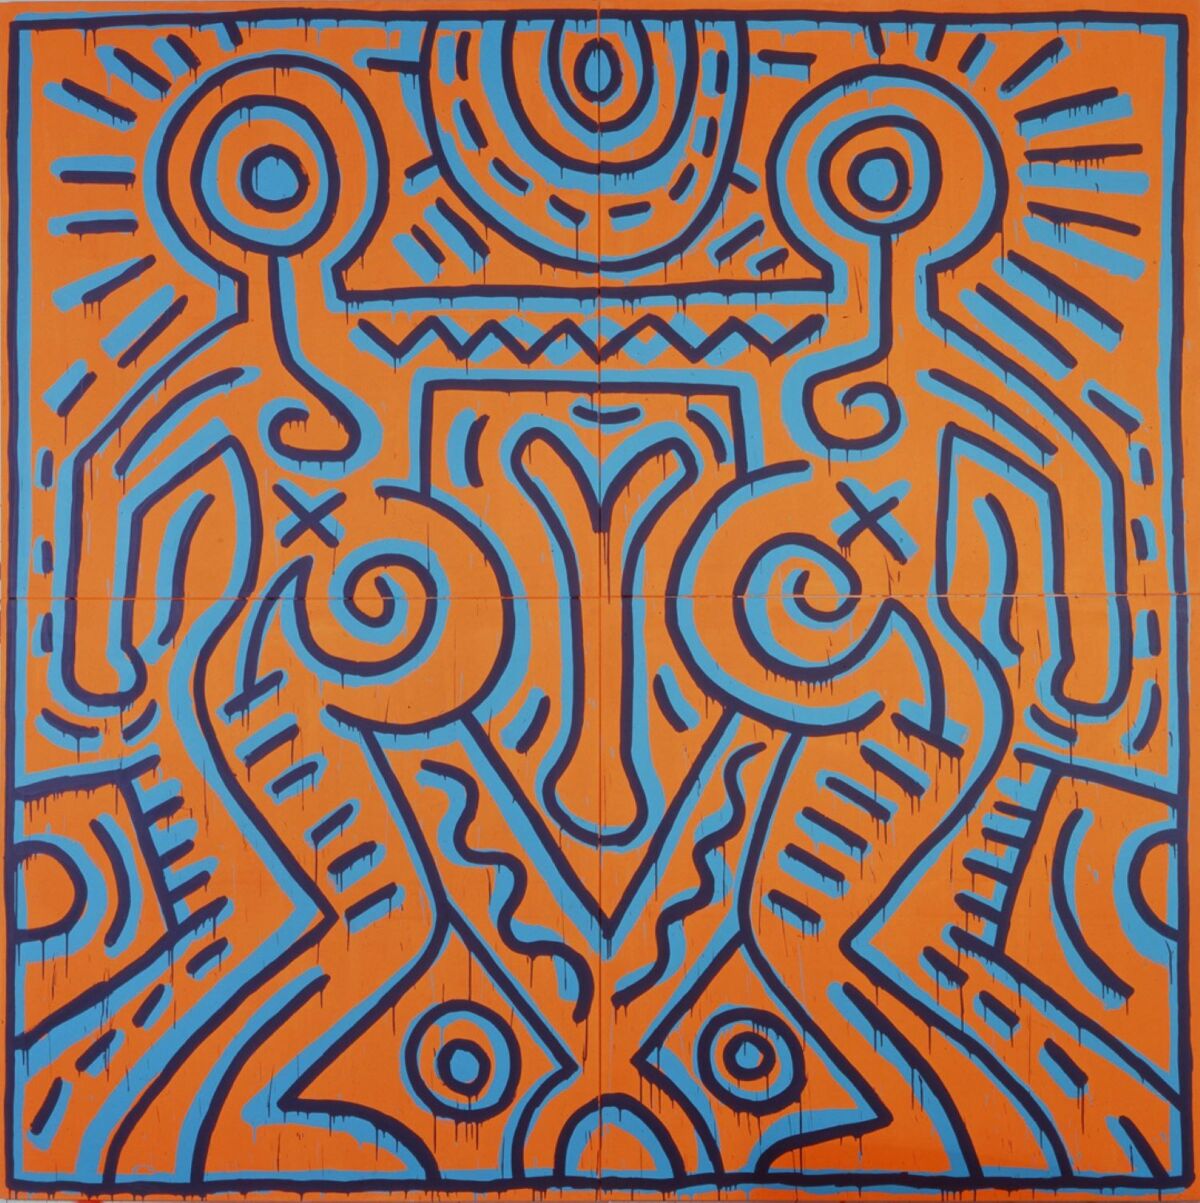 A blue, orange and black abstract work of art.